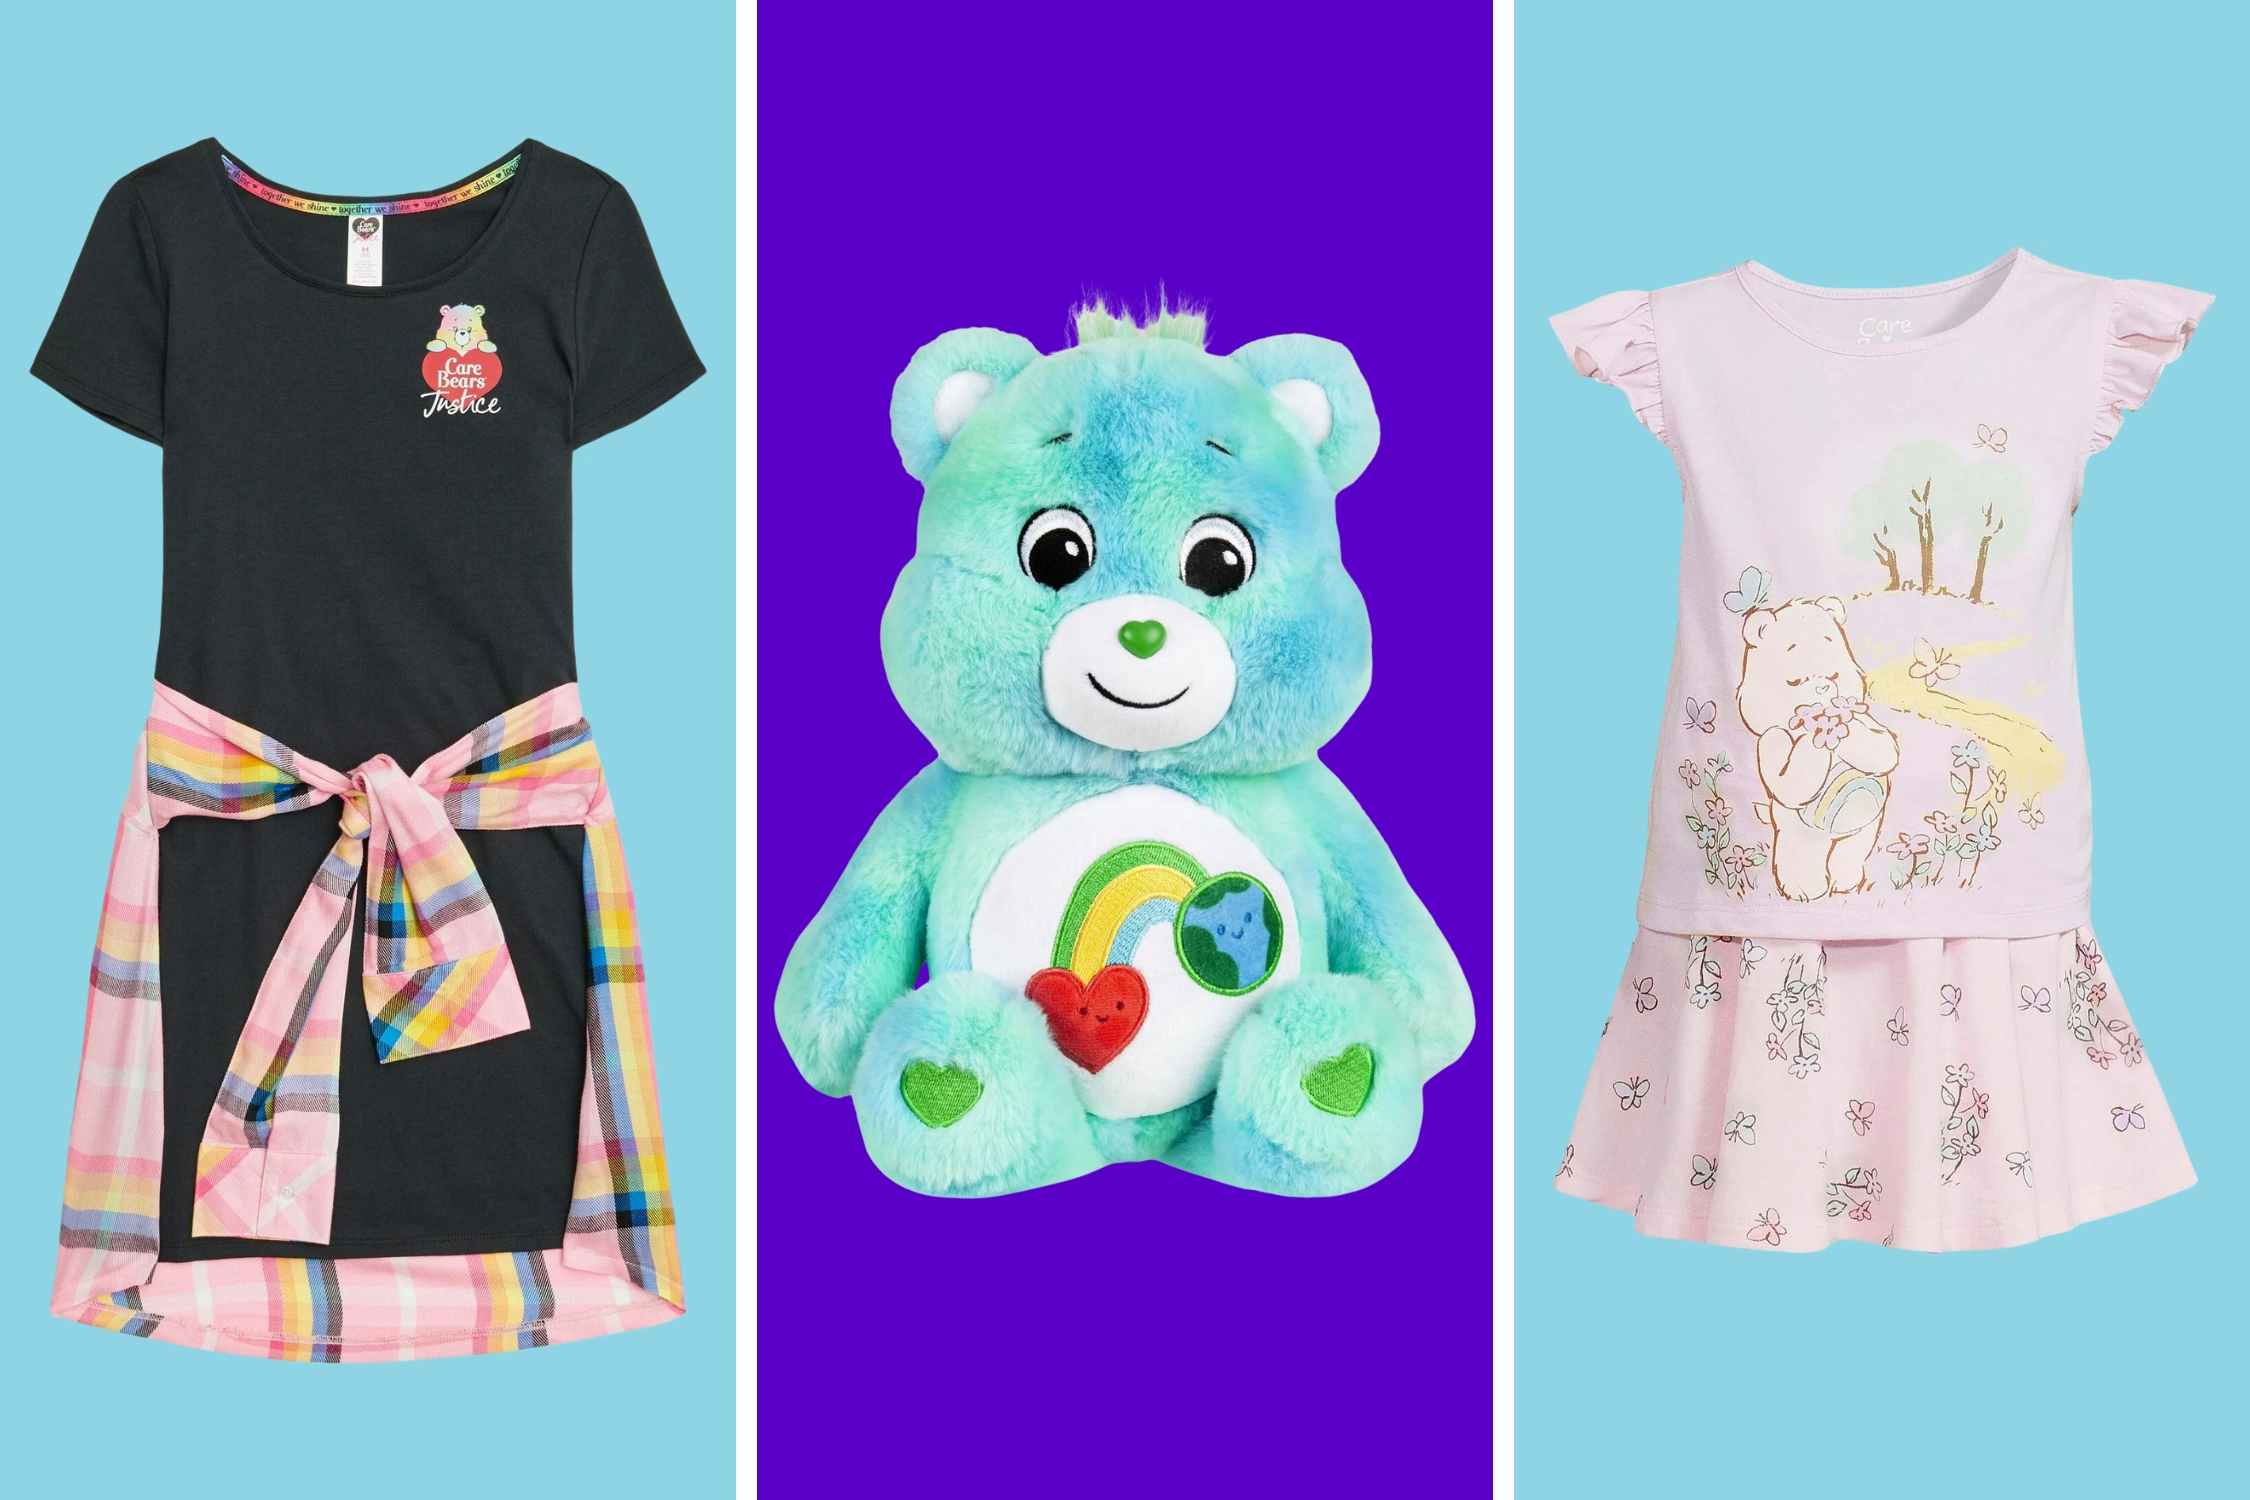 $9 Care Bear Plush and Care Bear Apparel From $9 at Walmart